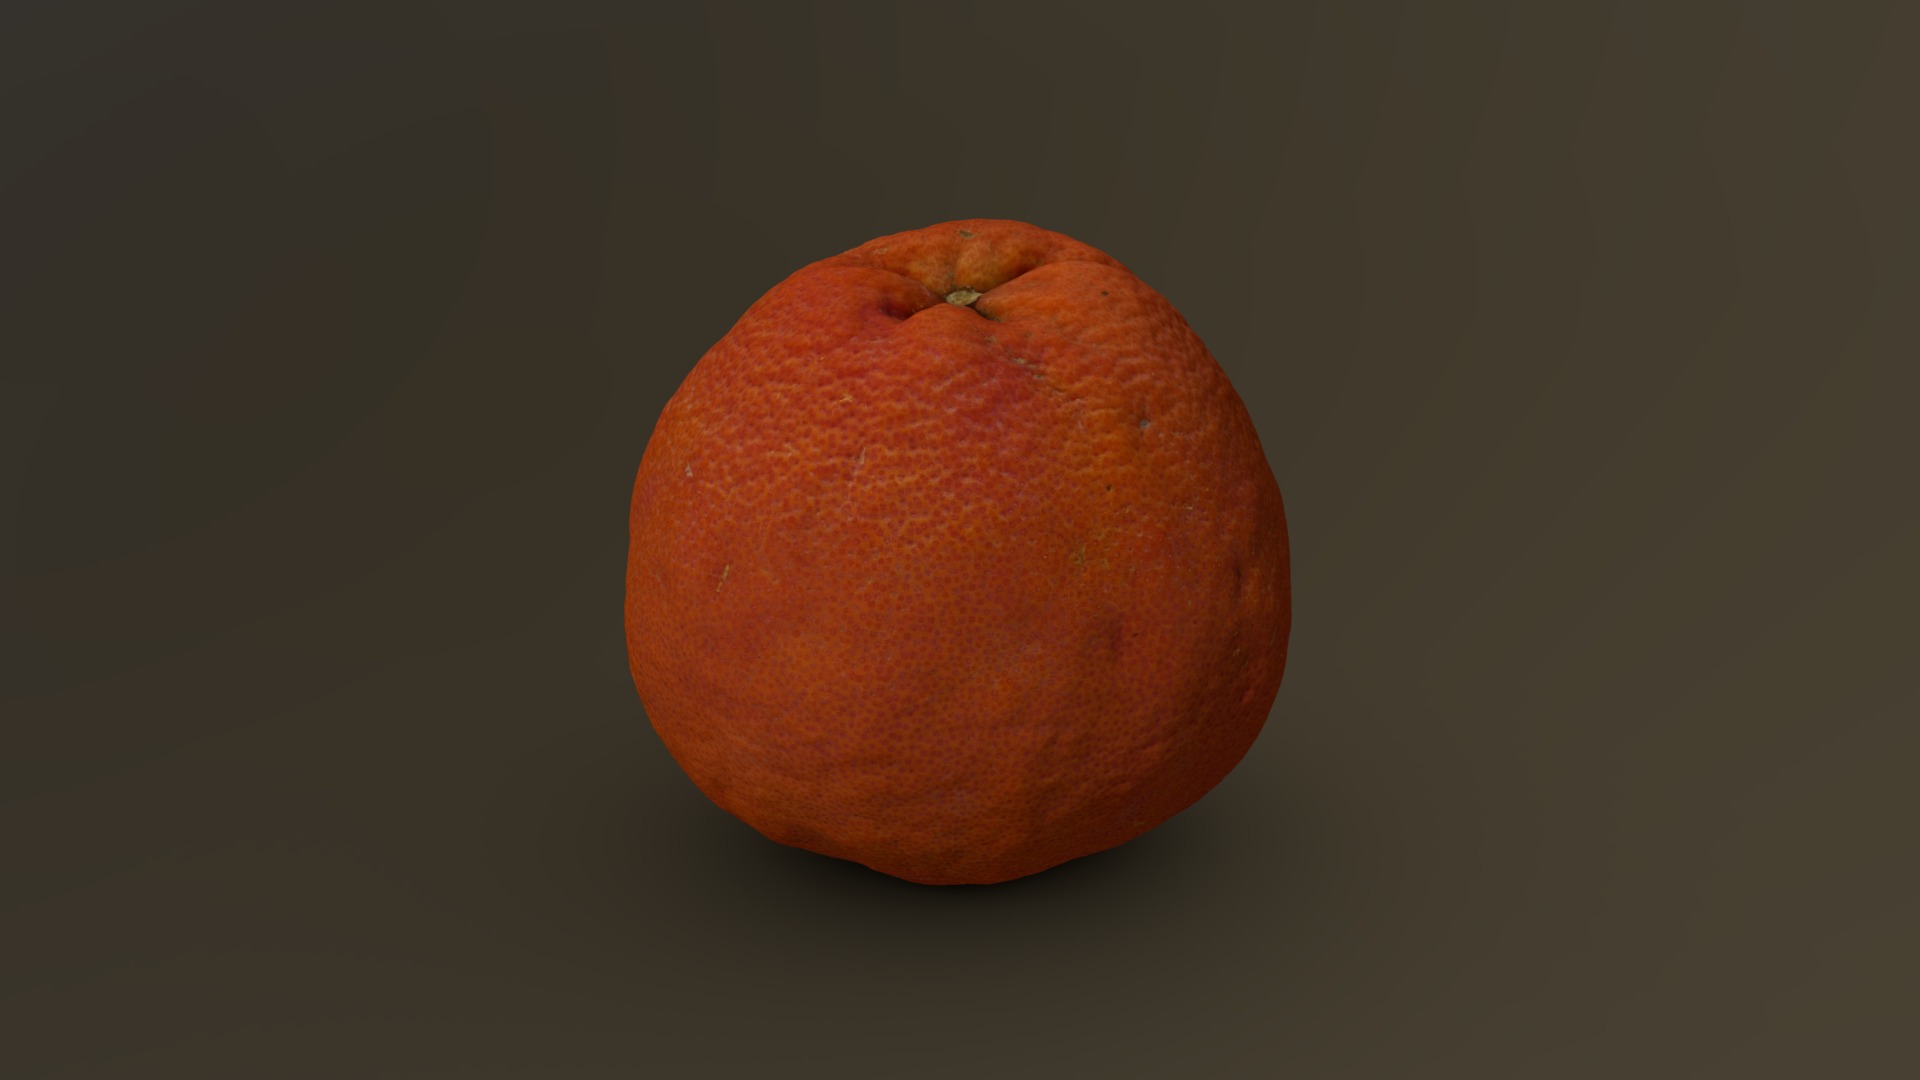 3D model Grapefruit 03 - This is a 3D model of the Grapefruit 03. The 3D model is about an orange on a black background.